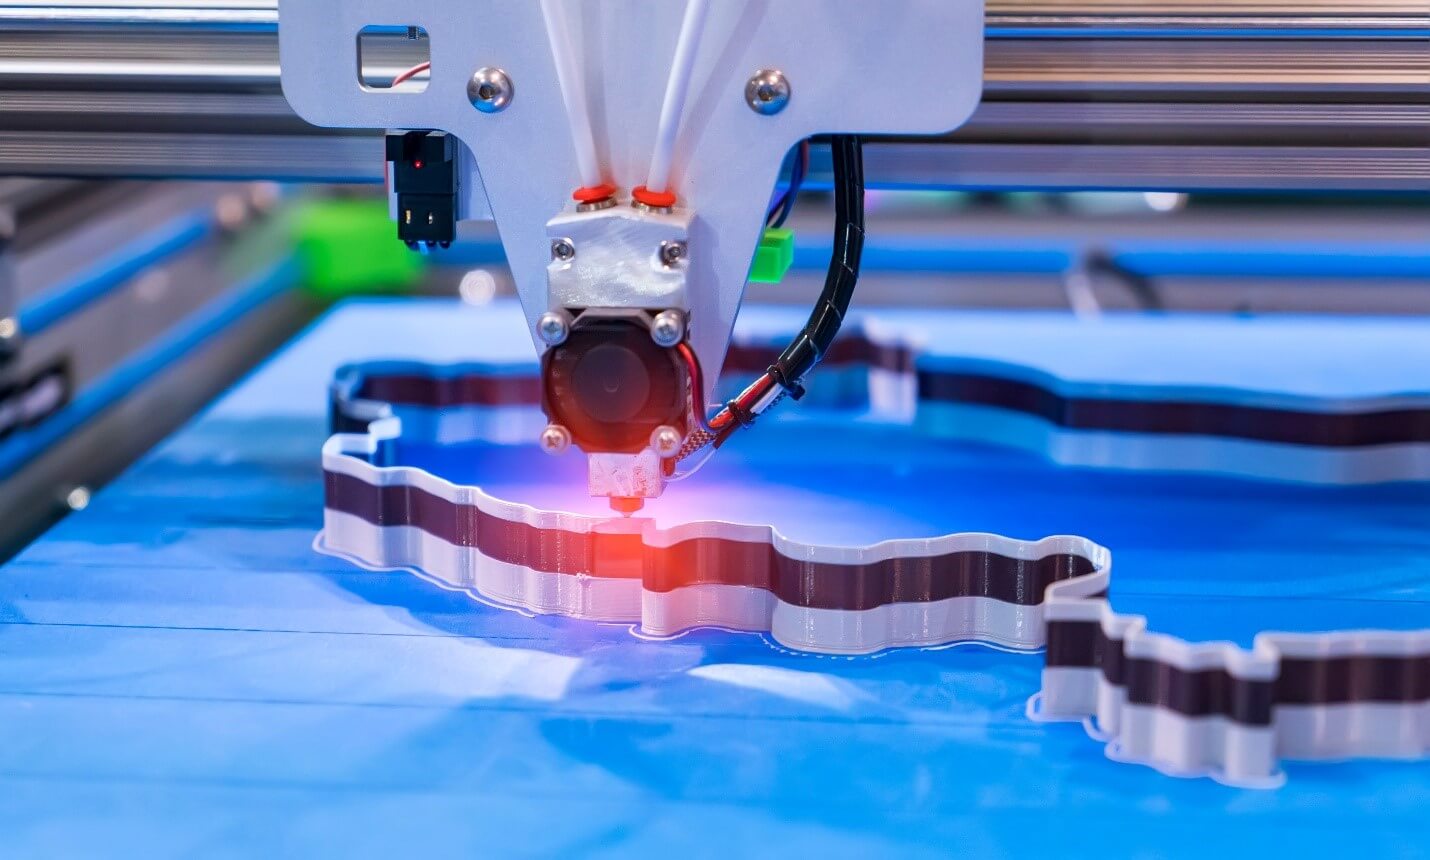 How is UV light part of the fast-evolving 3D printing technology?